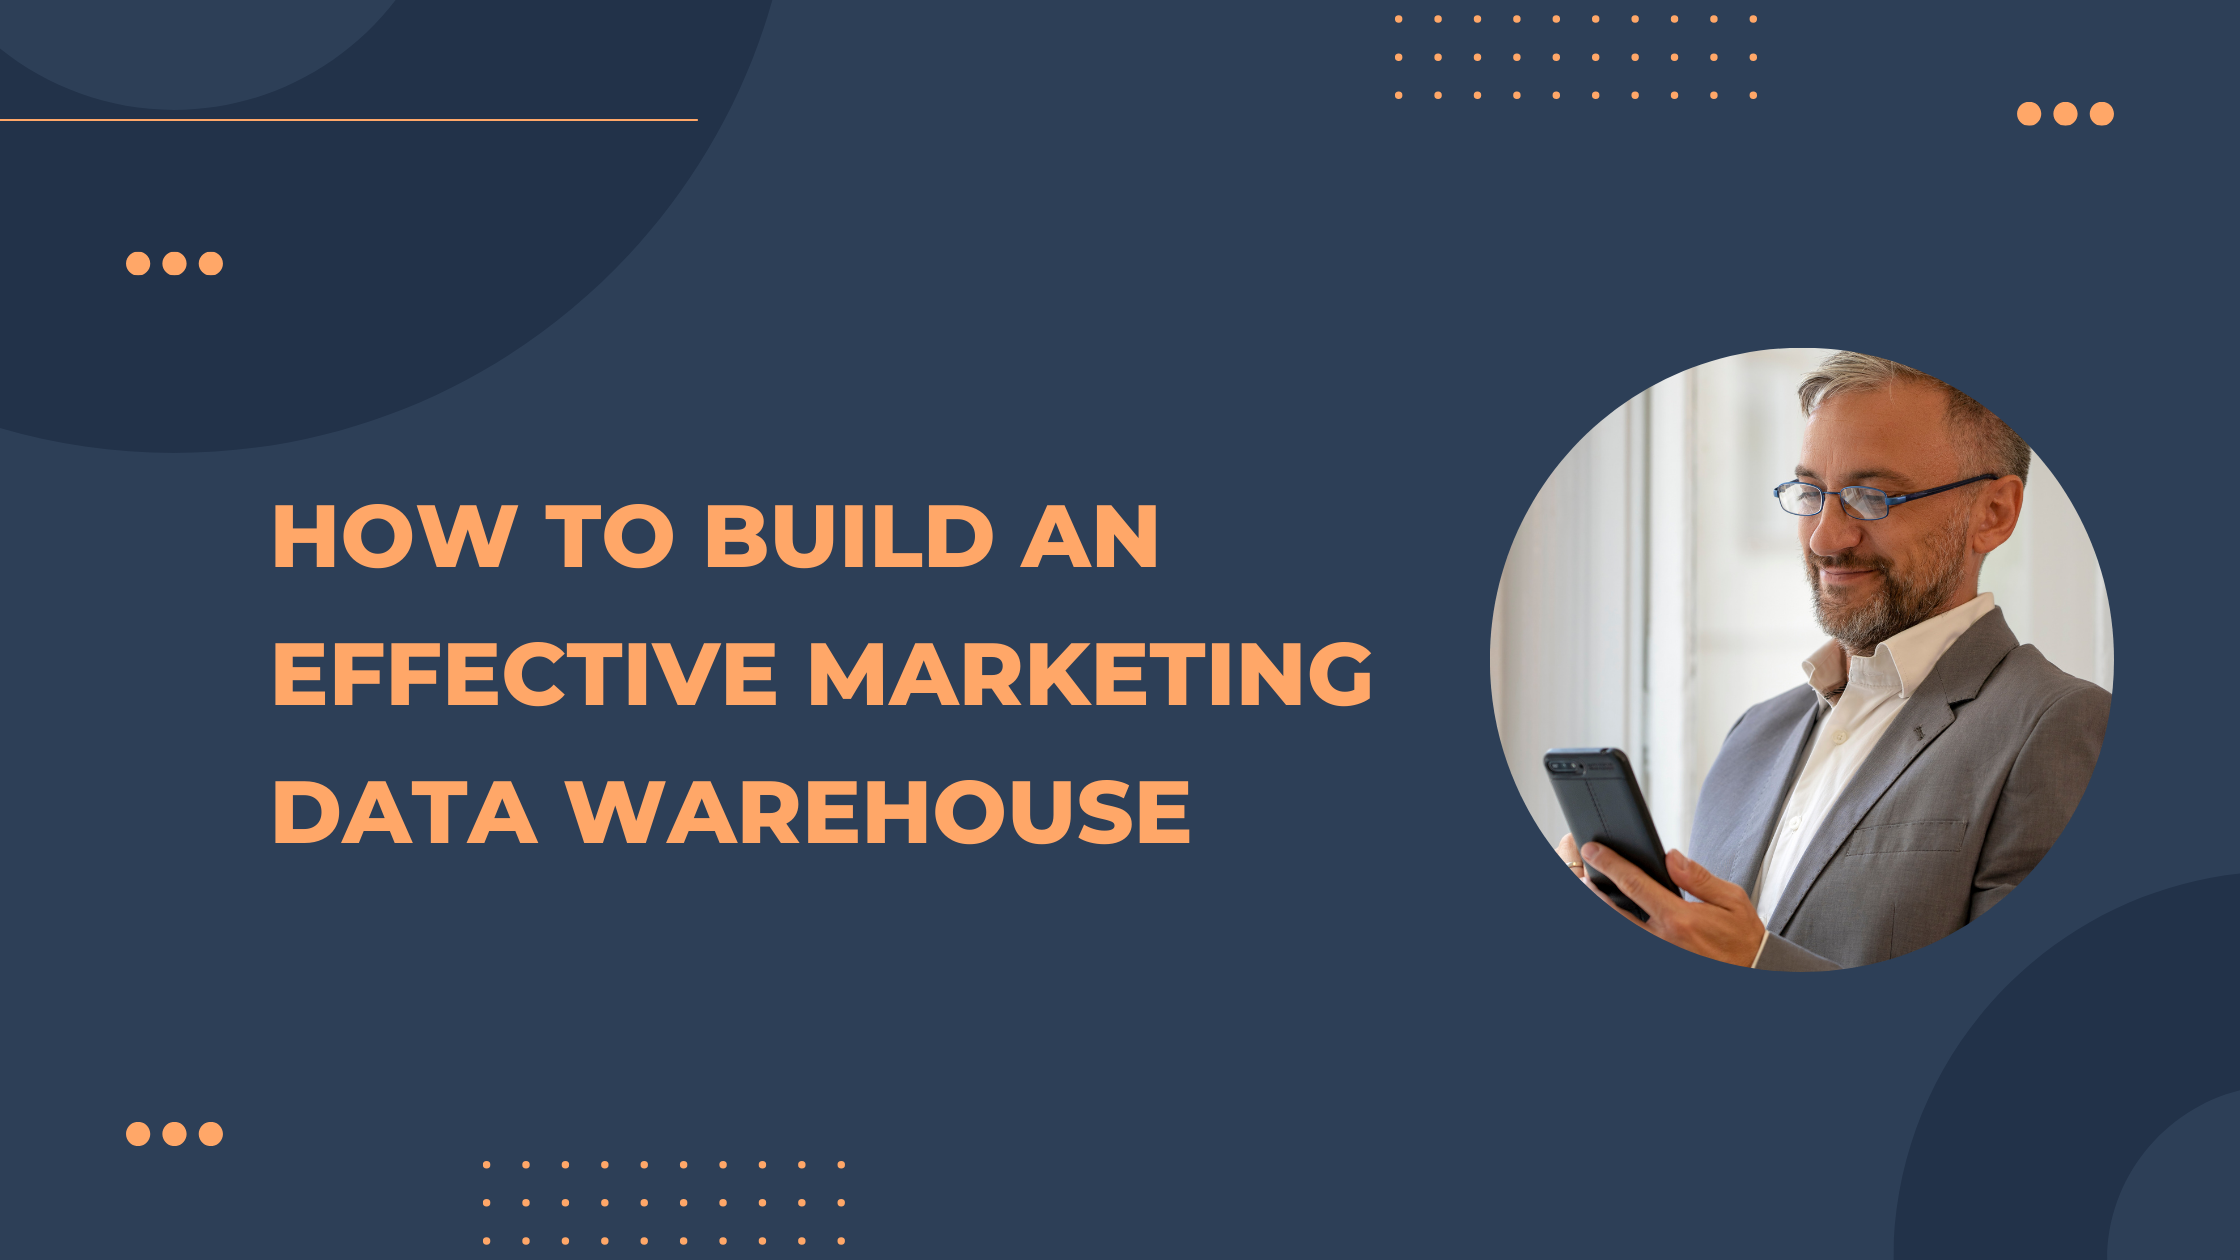 How to Build an Effective Marketing Data Warehouse